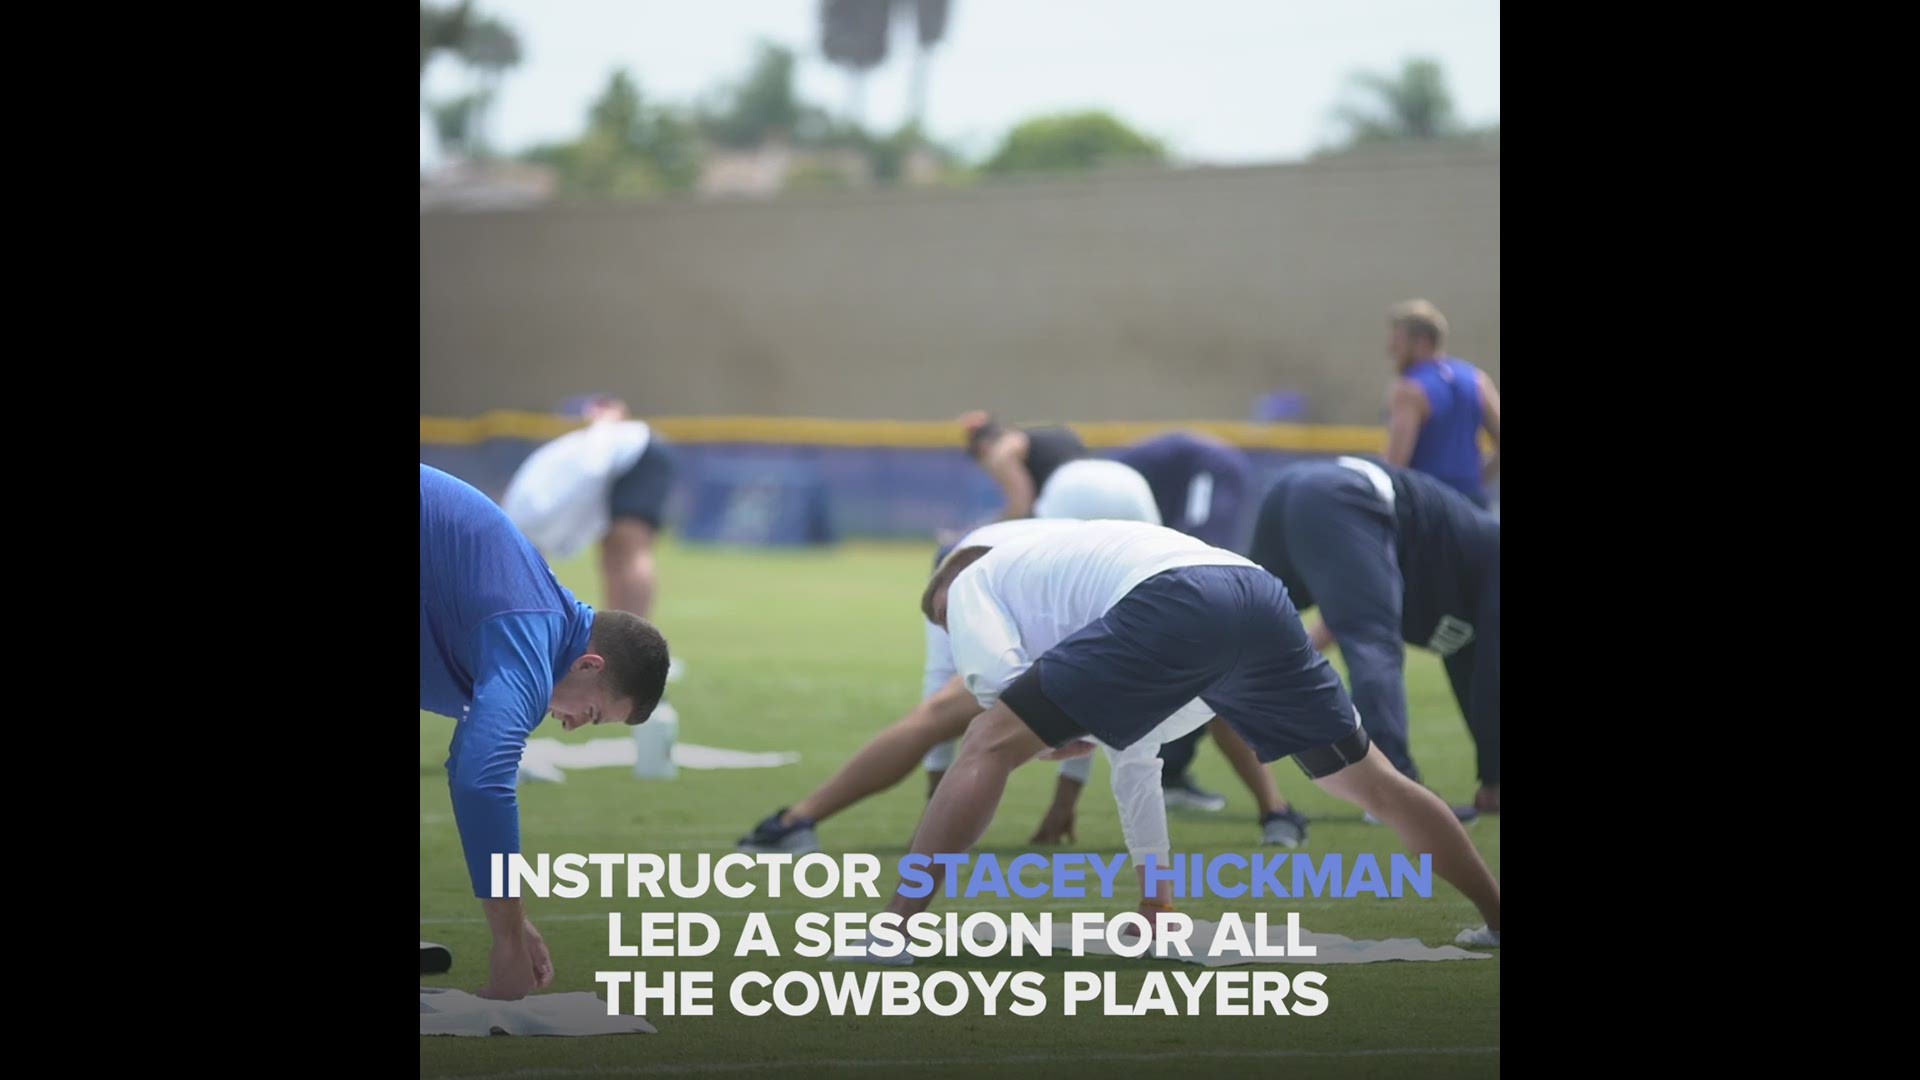 The Dallas Cowboys turned to yoga to prepare for the first padded practice of training camp in Oxnard, California. WFAA.com